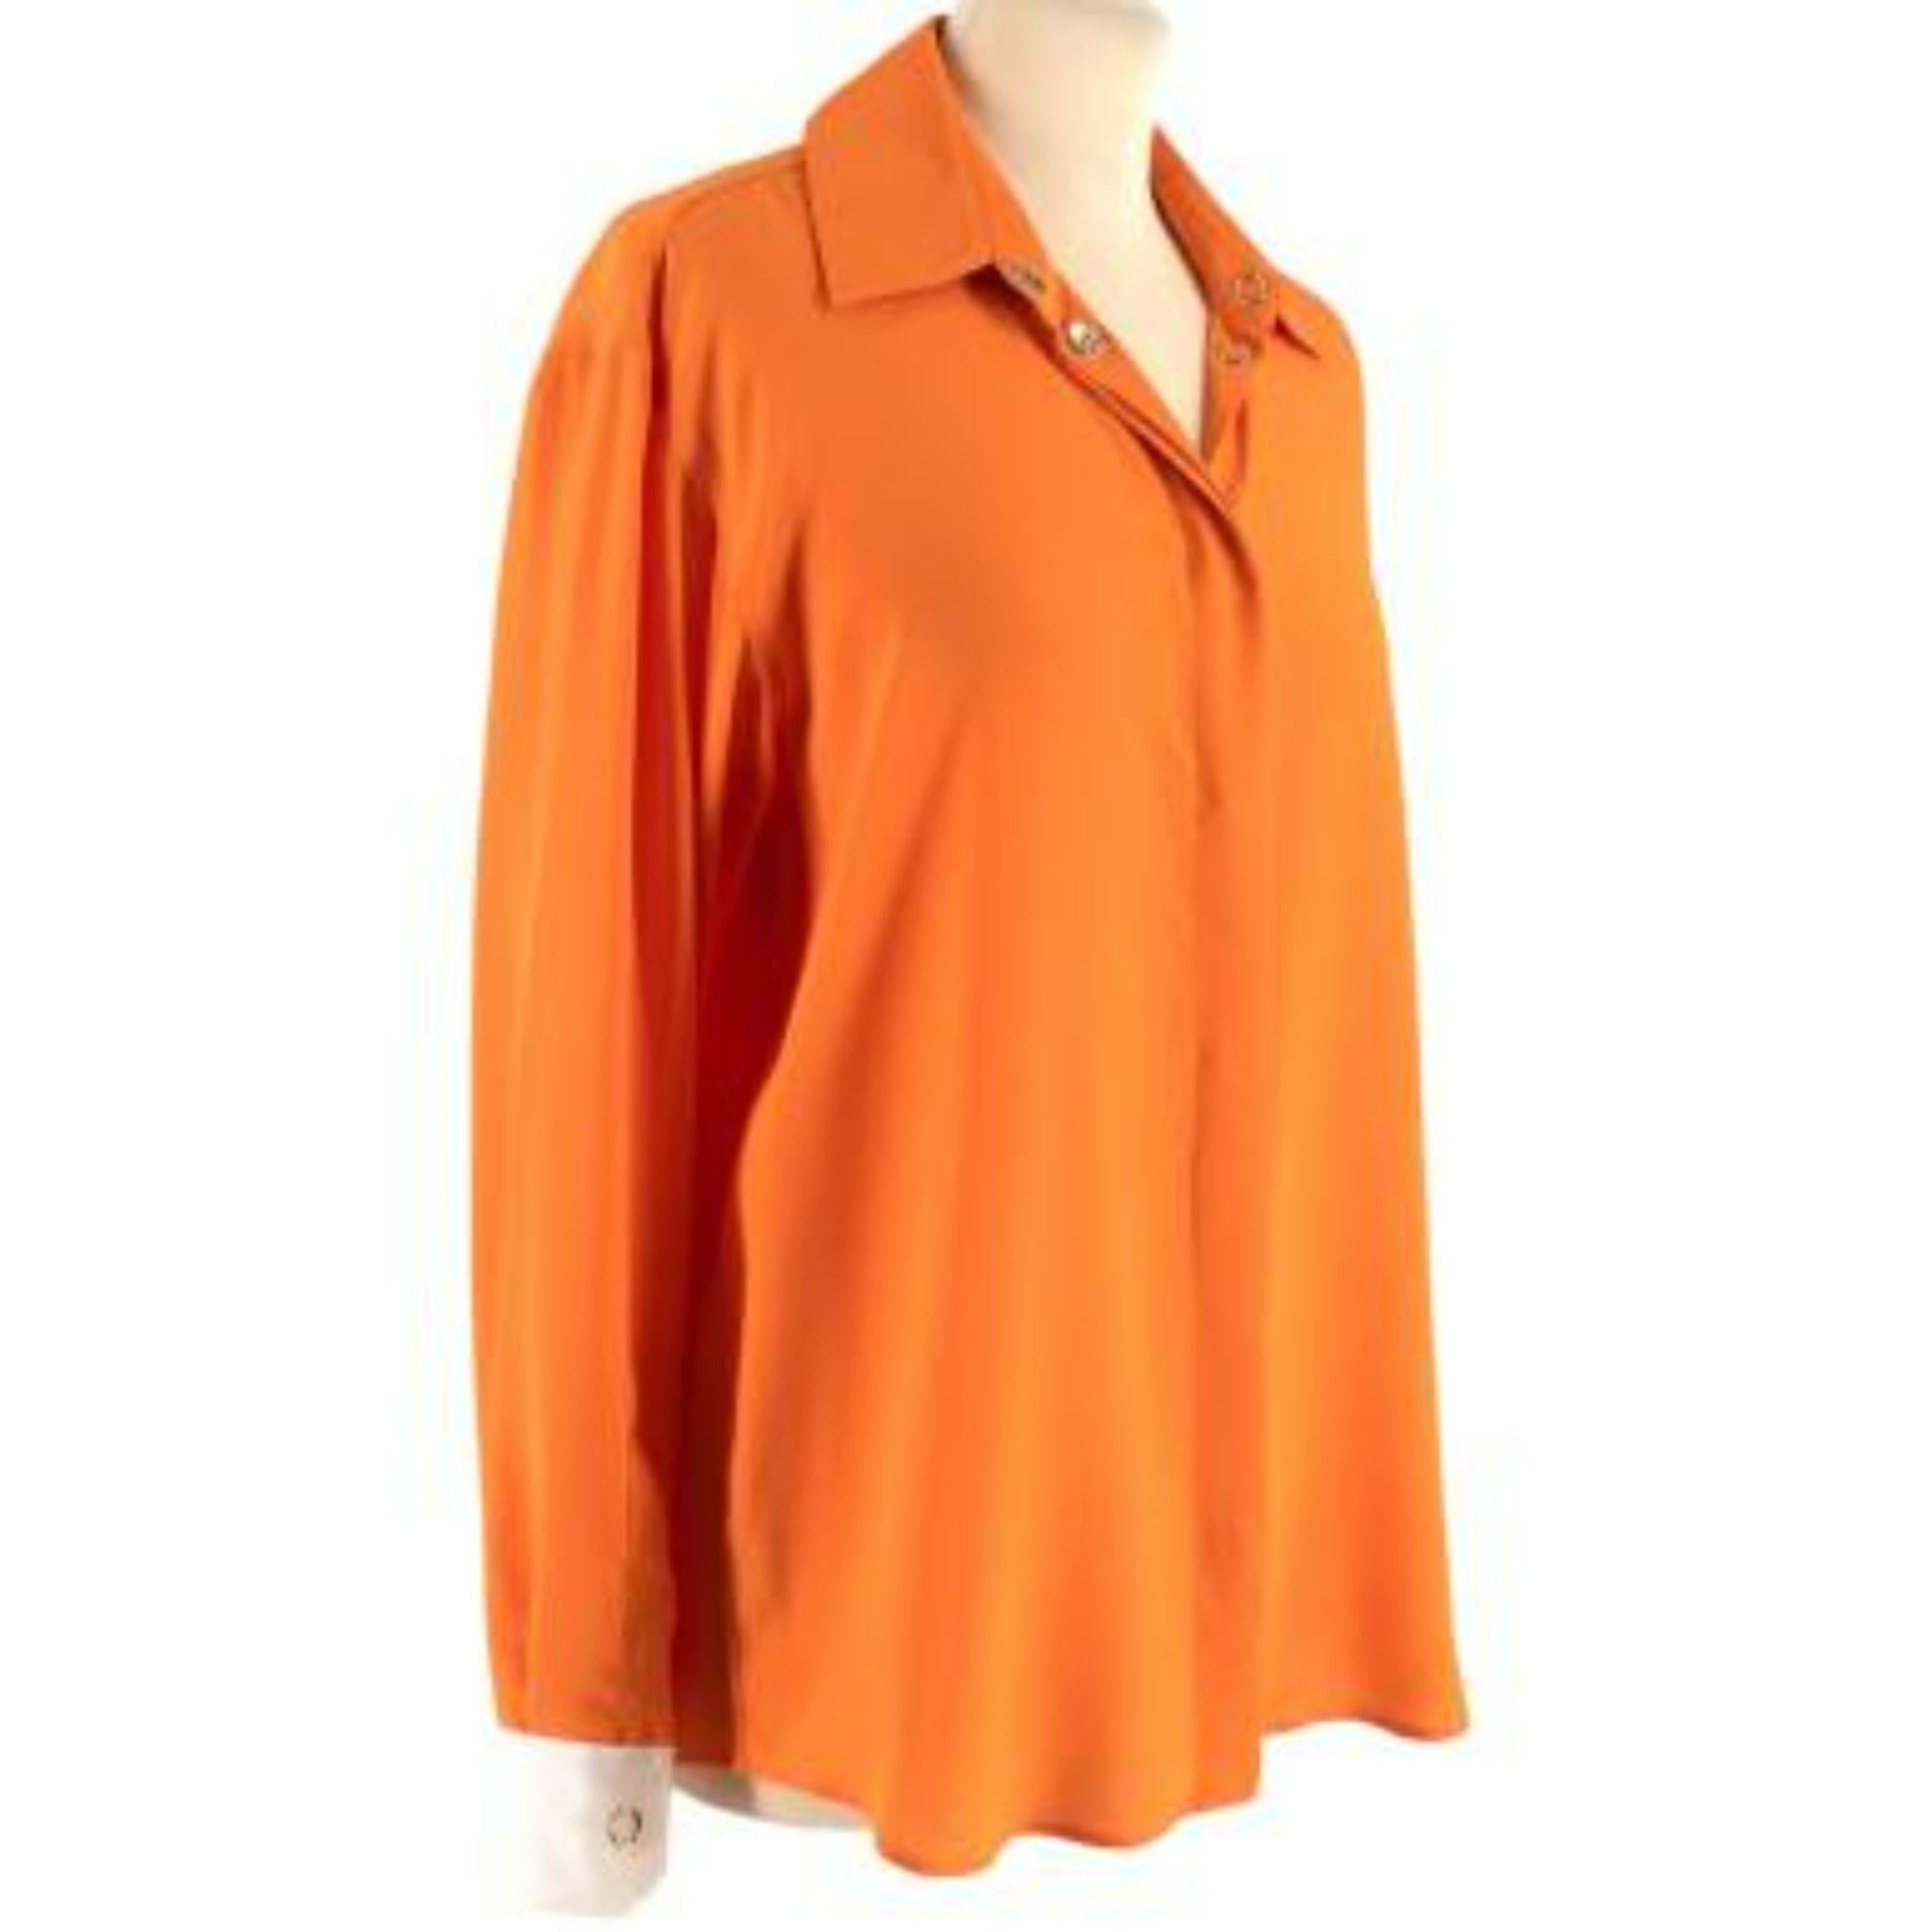 Burberry Orange and White Silk Shirt

- Light weight, fluid silk 
- Orange body 
- White tip cuffs 
- Concealed popper button stand 
- Loose fitting

Materials:
100% Silk

Made in Italy 

Dry clean only 

PLEASE NOTE, THESE ITEMS ARE PRE-OWNED AND